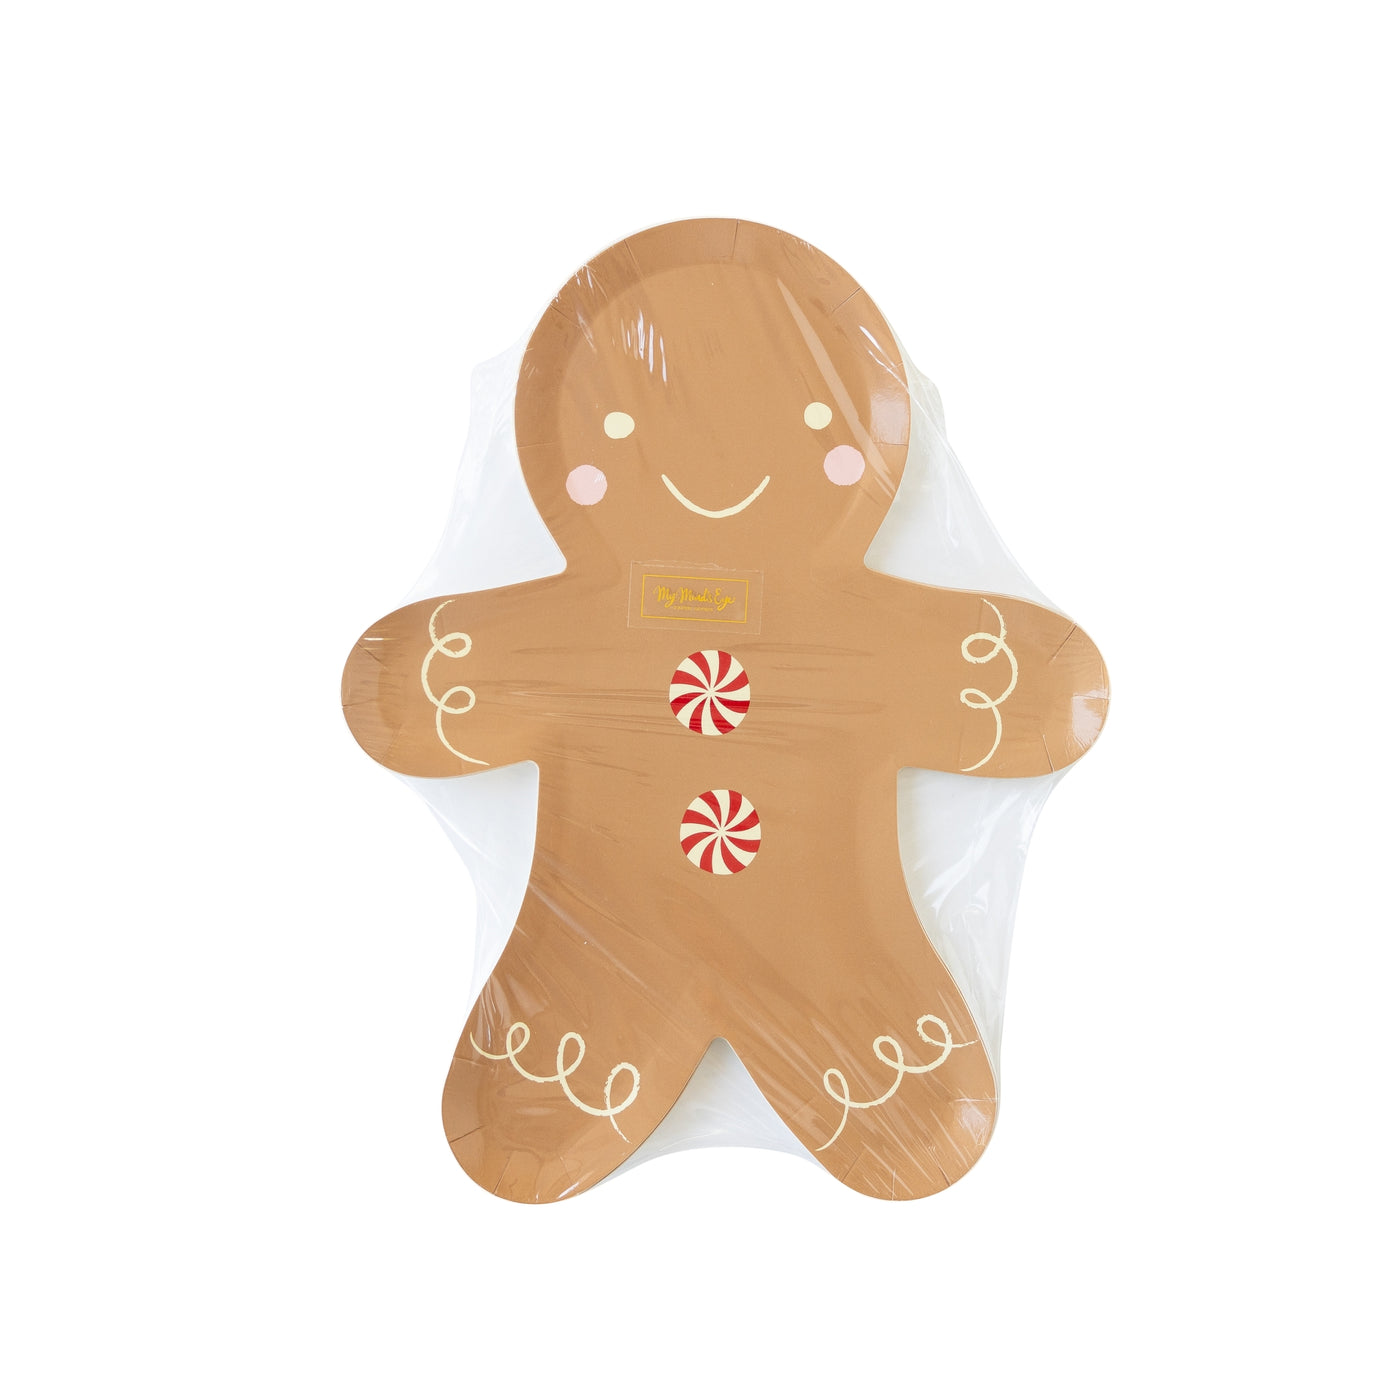 Gingerbread Man Shaped Paper Plate